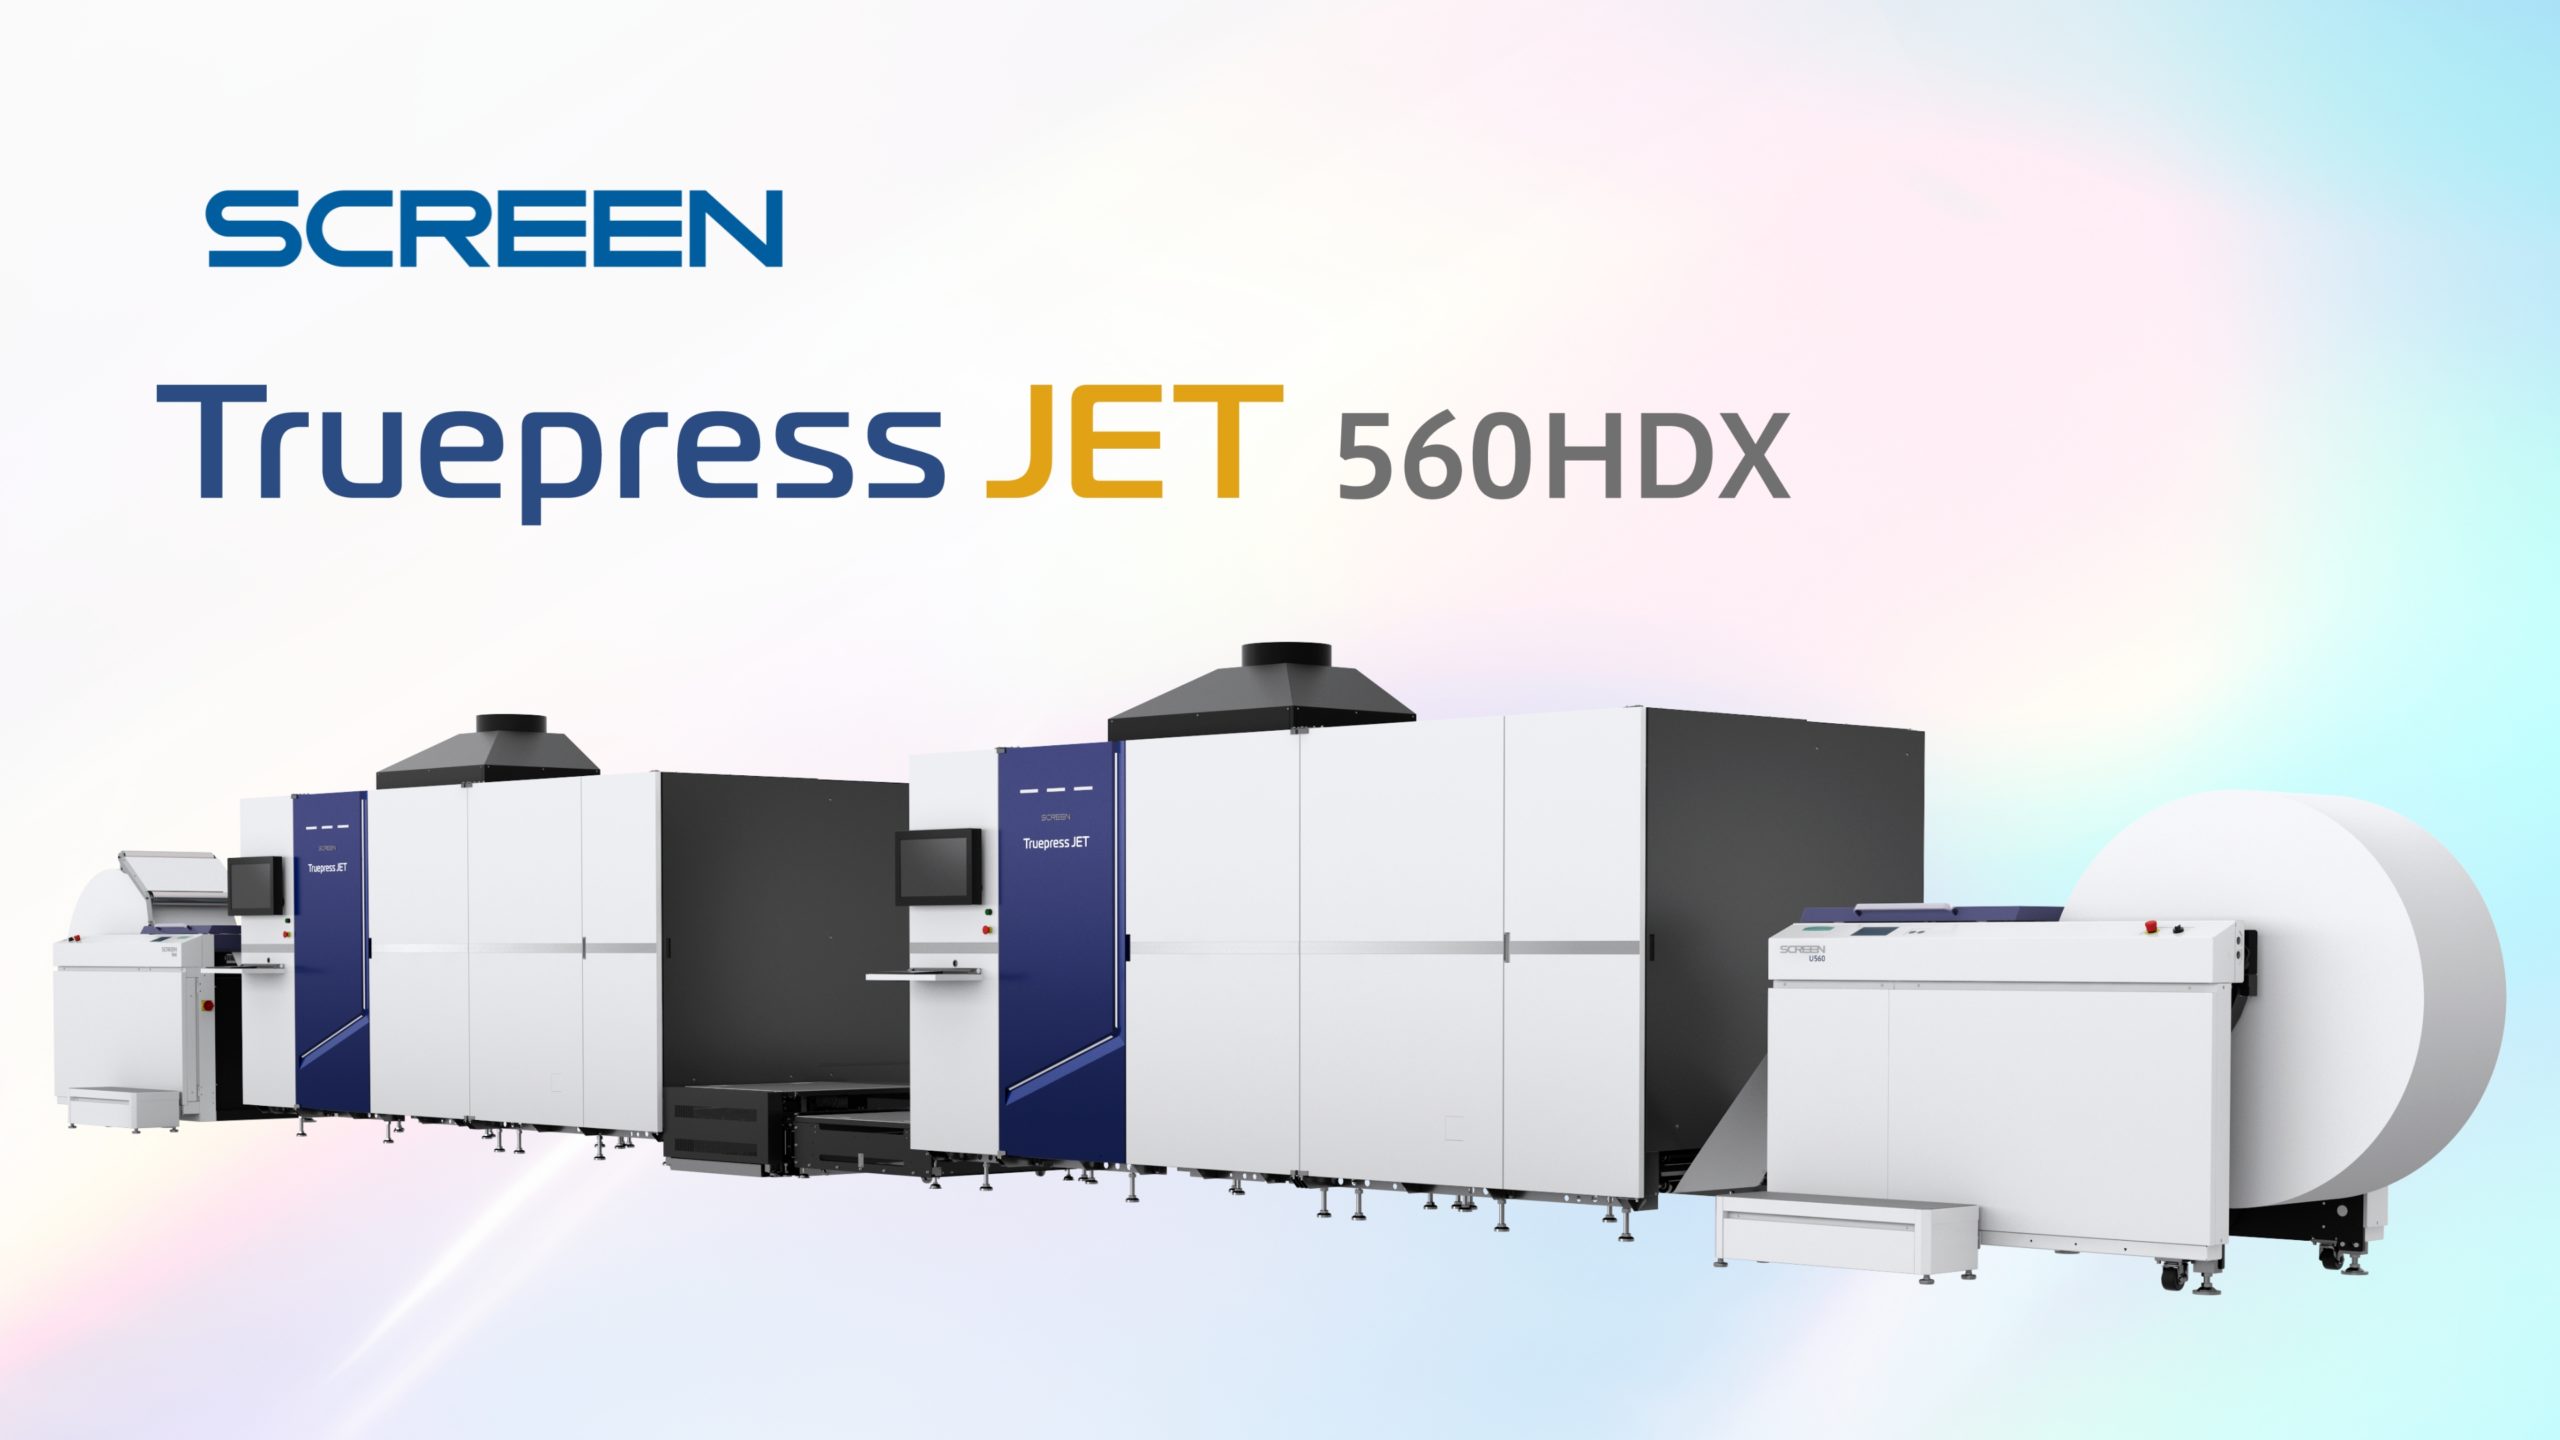 Image from SCREEN develops Truepress JET 560HDX to deliver innovation in print production